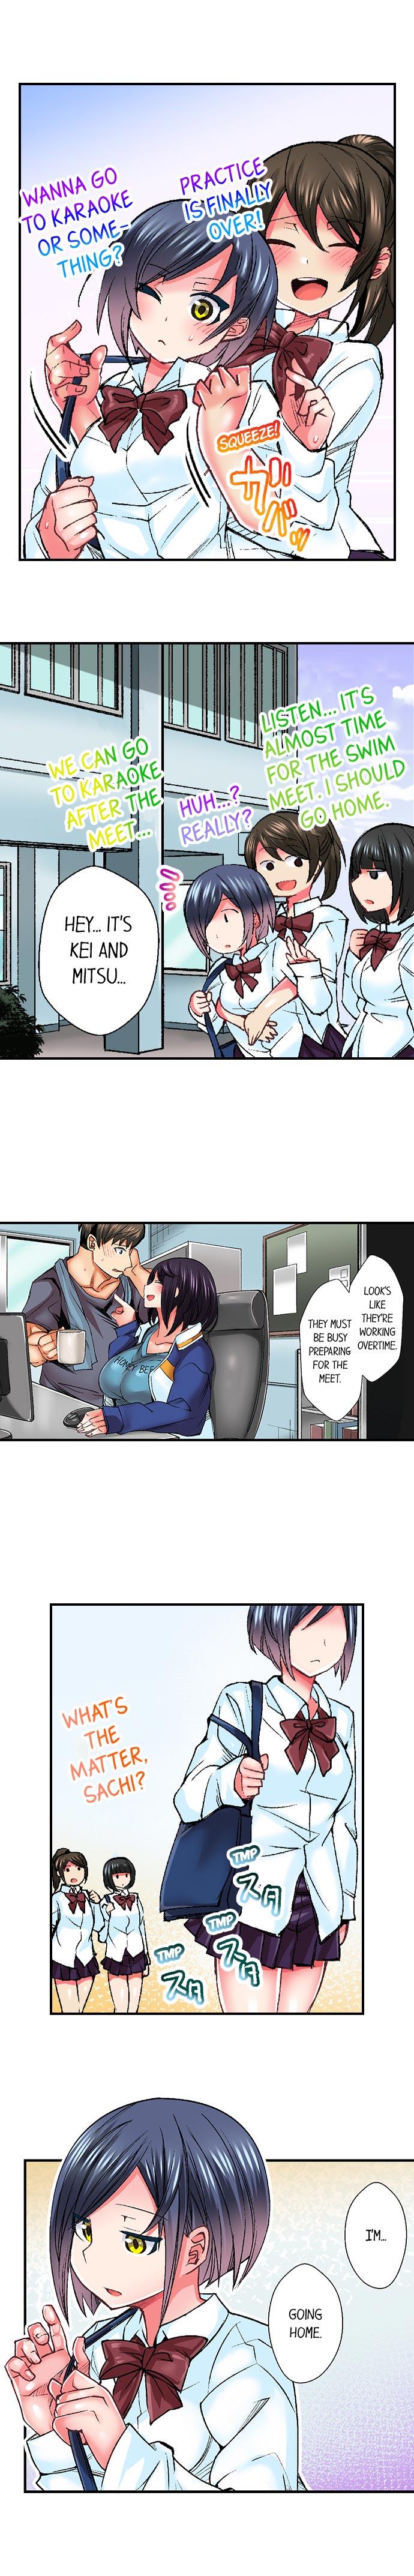 Athlete's Strong Sex Drive Ch. 1 - 12 79